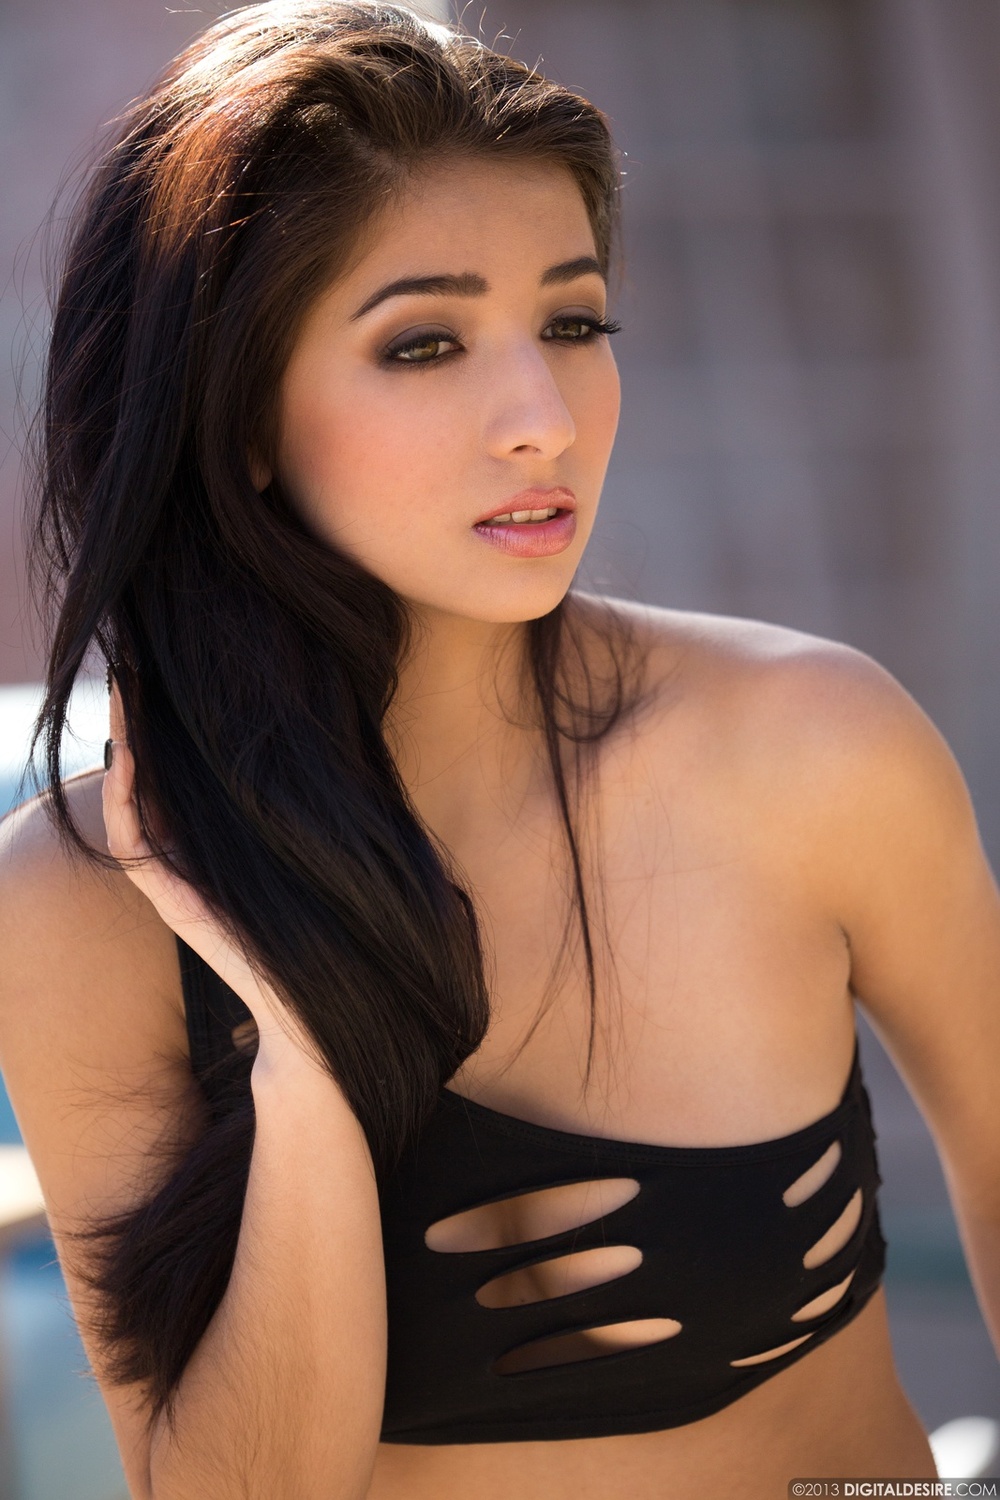 Megan Salinas Is Hot To The Touch 15